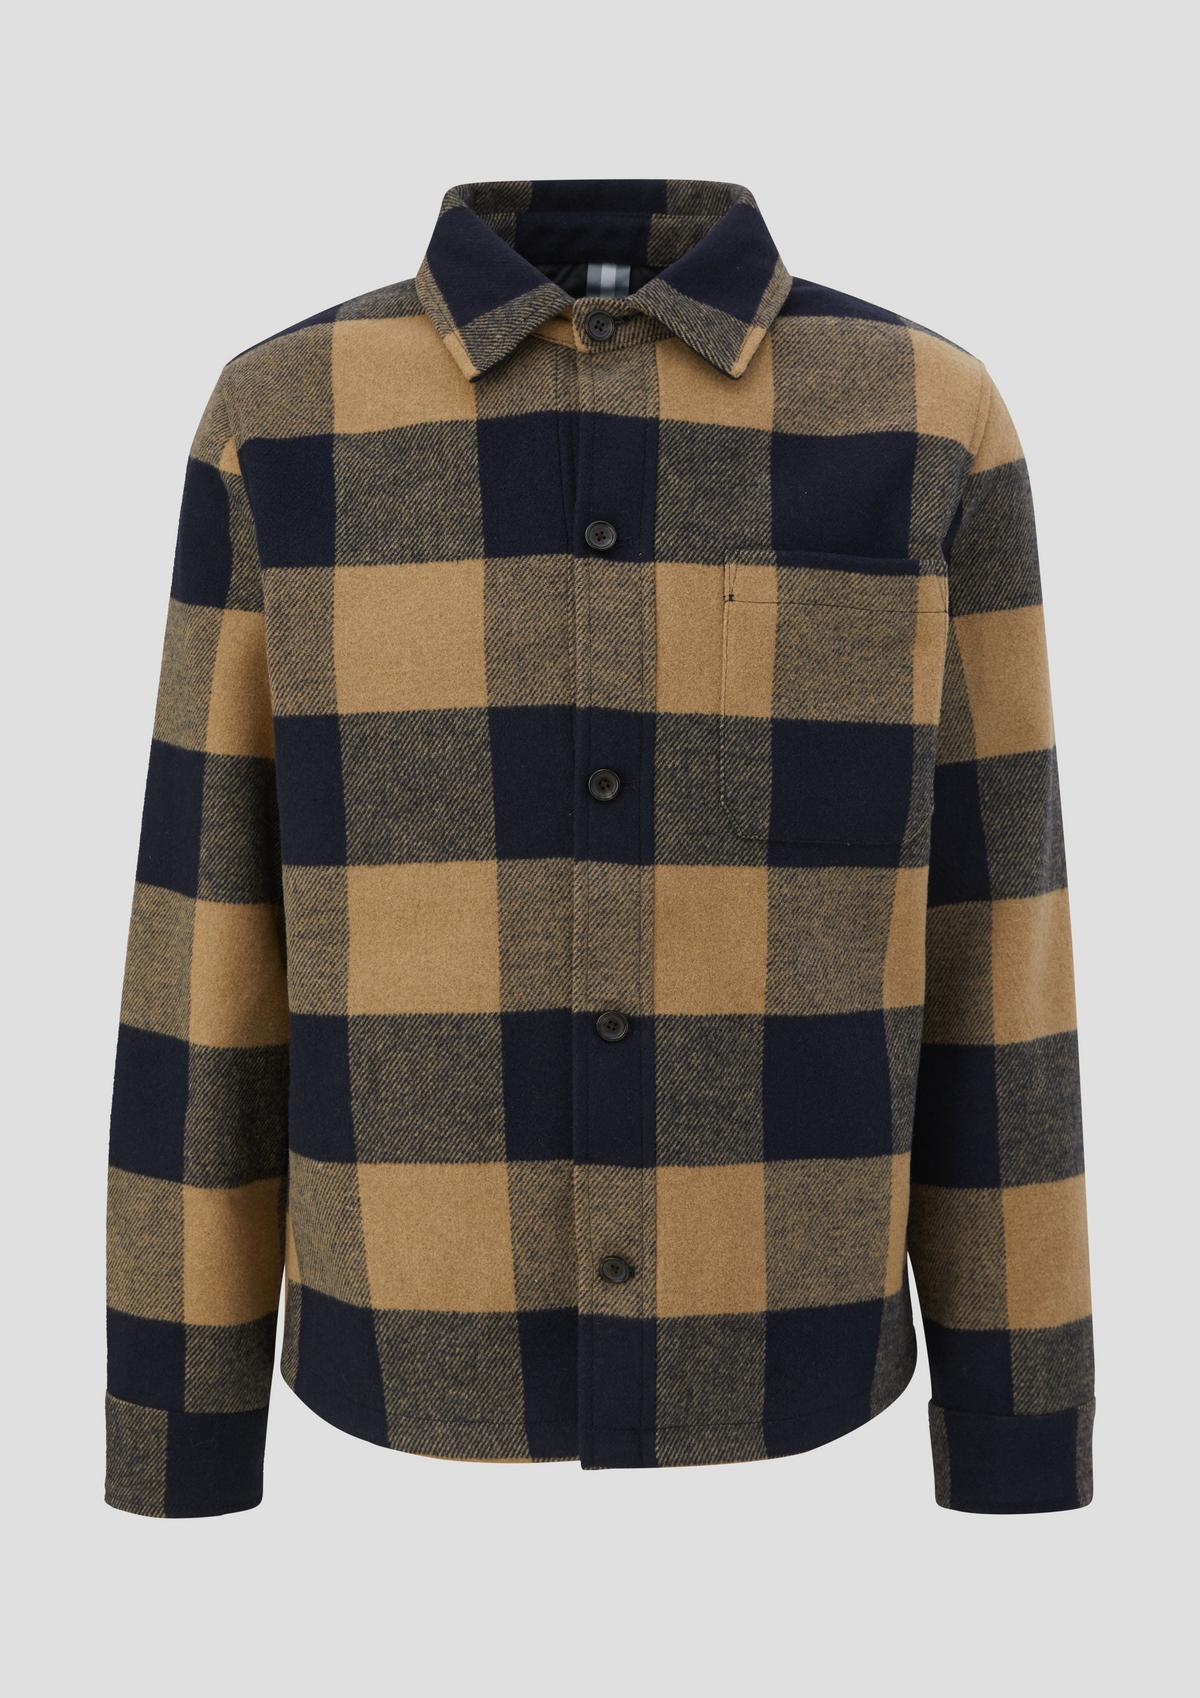 s.Oliver Shirt jacket with a twill texture